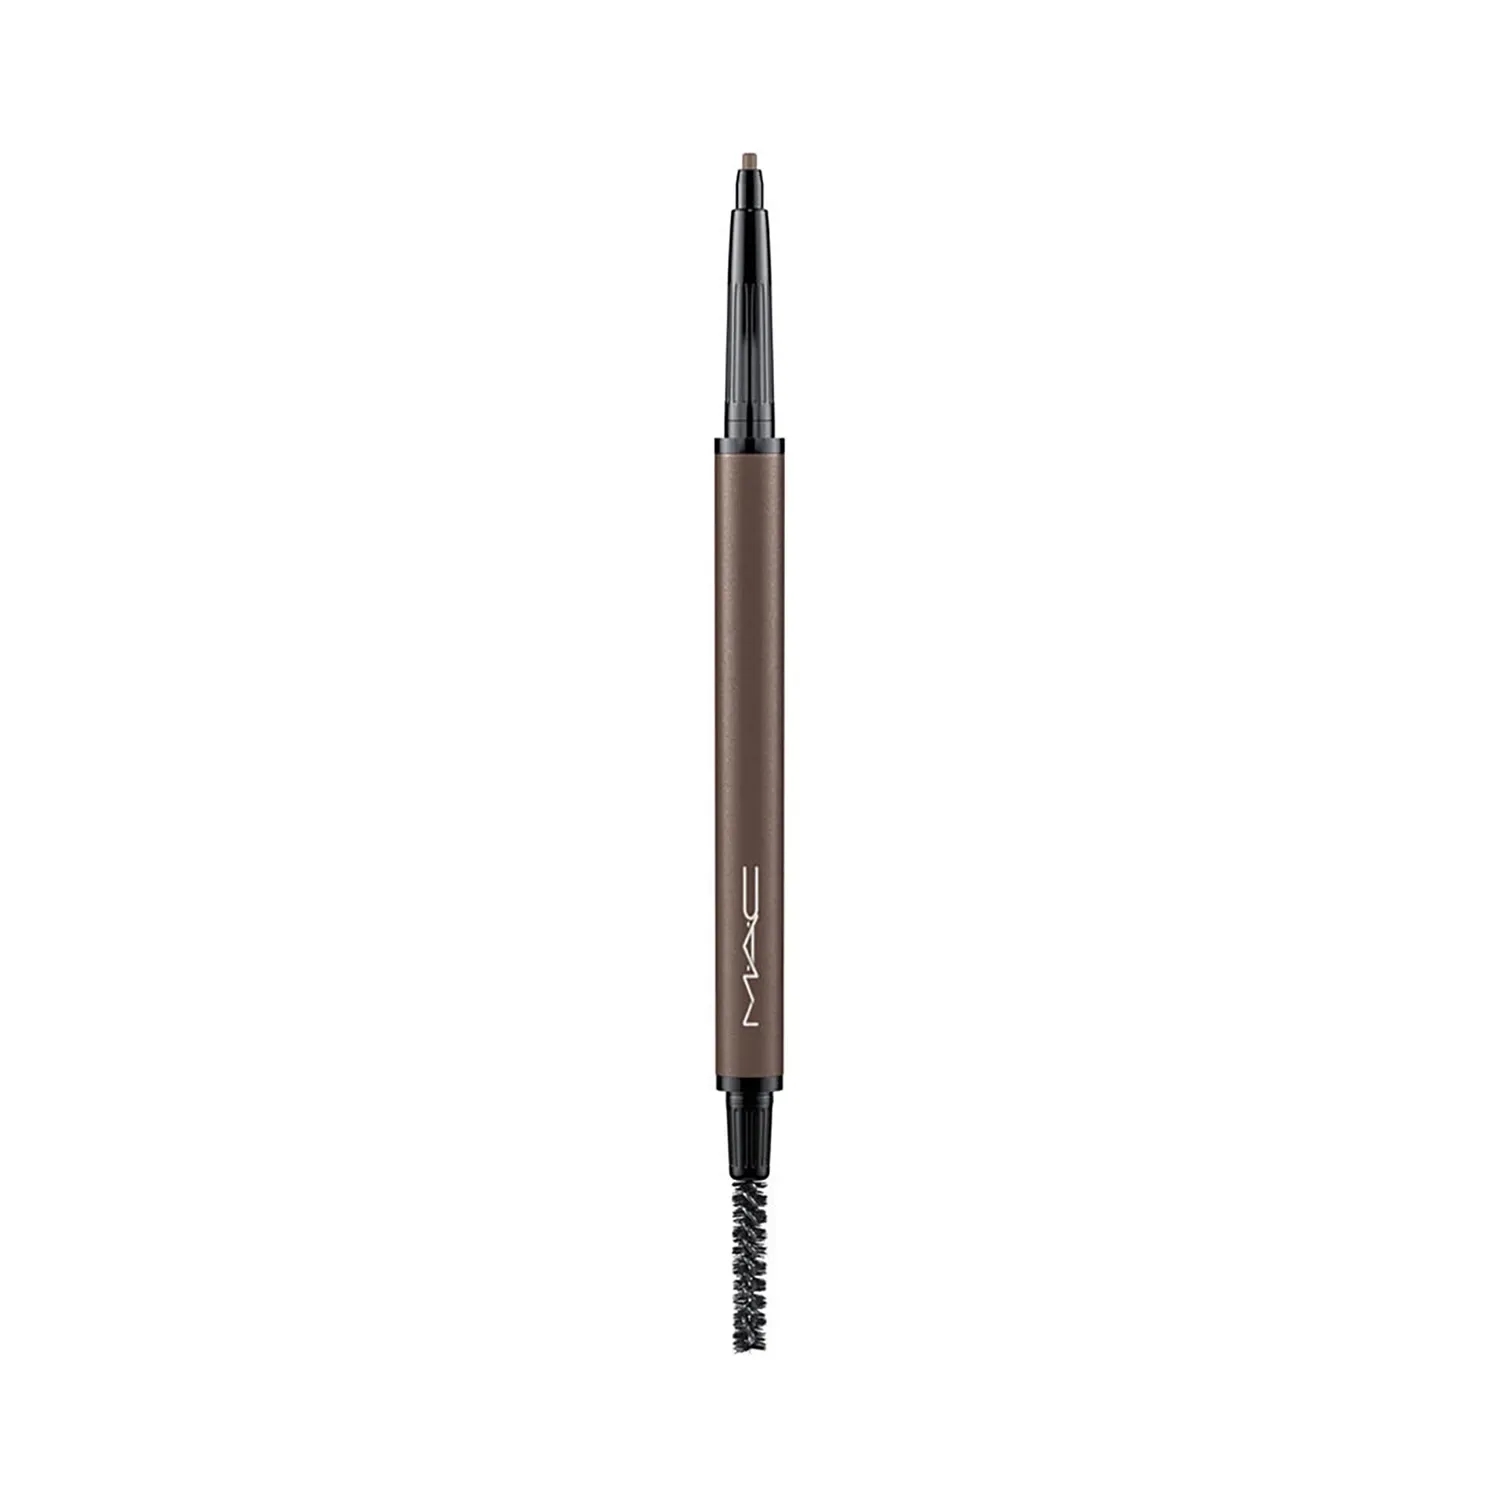 M.A.C | M.A.C Eye Brows Styler - Spiked (0.09g)